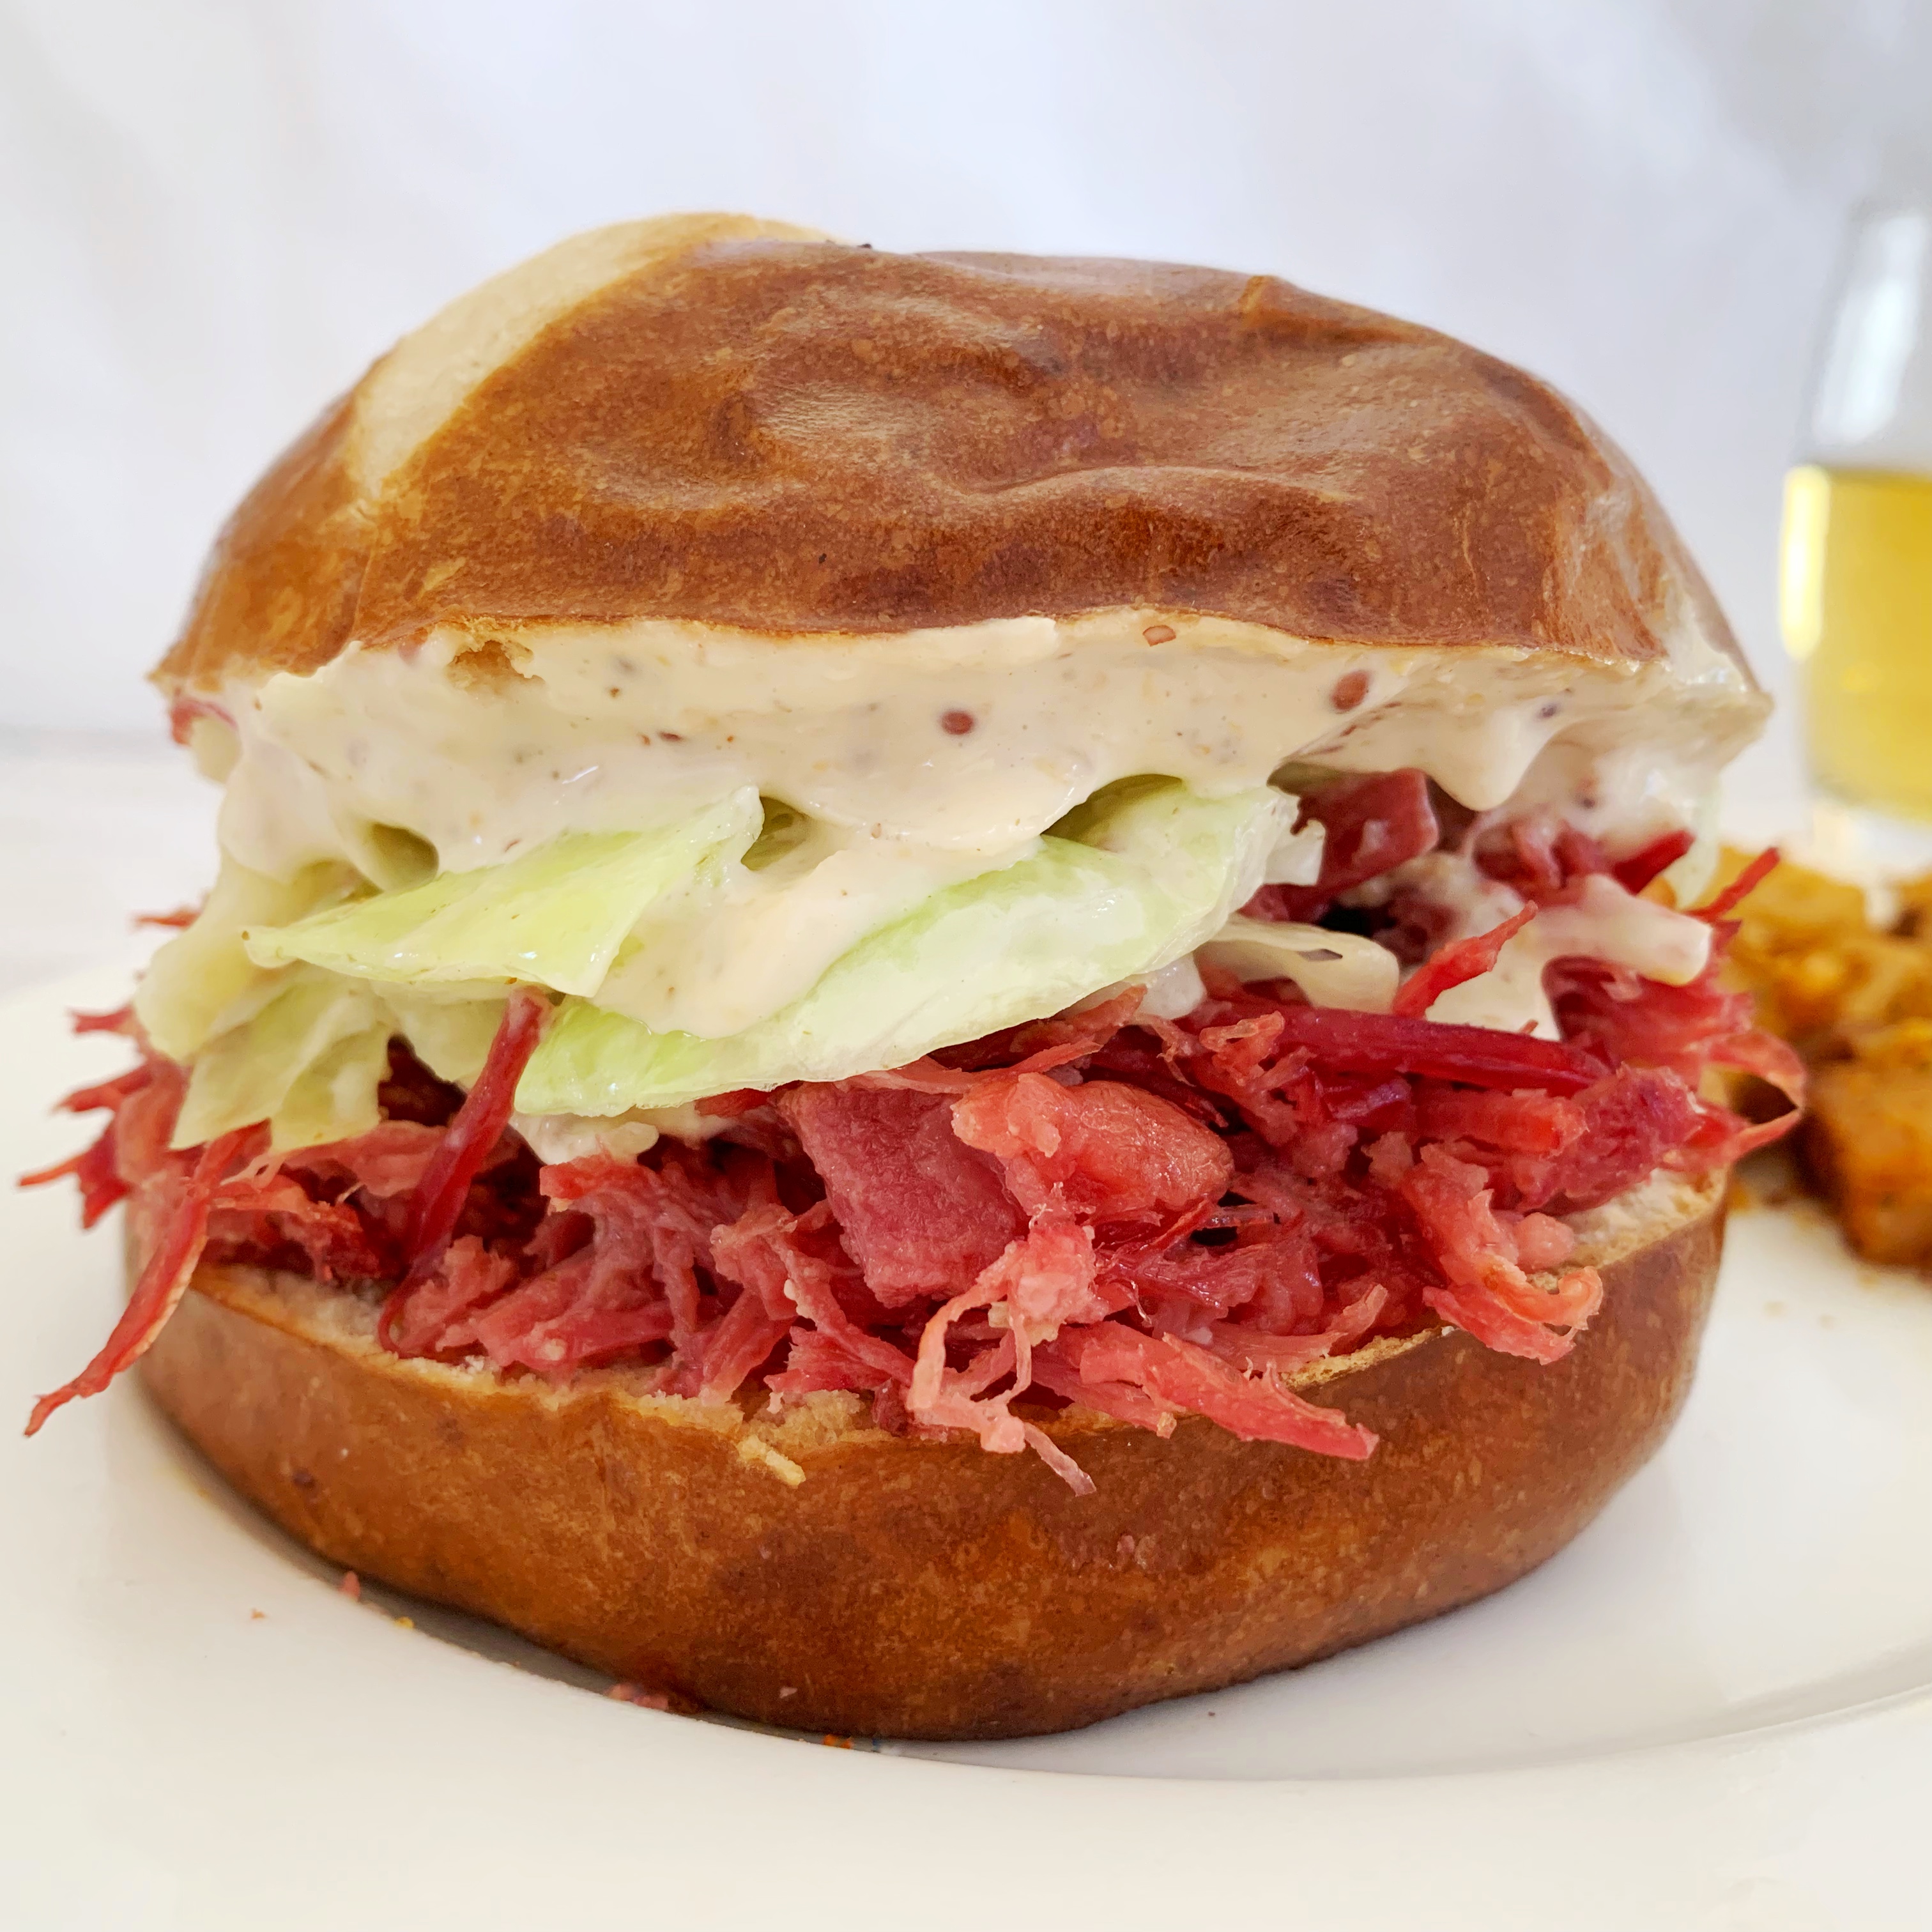 Corned beef and cabbage sandwiches – delicious!